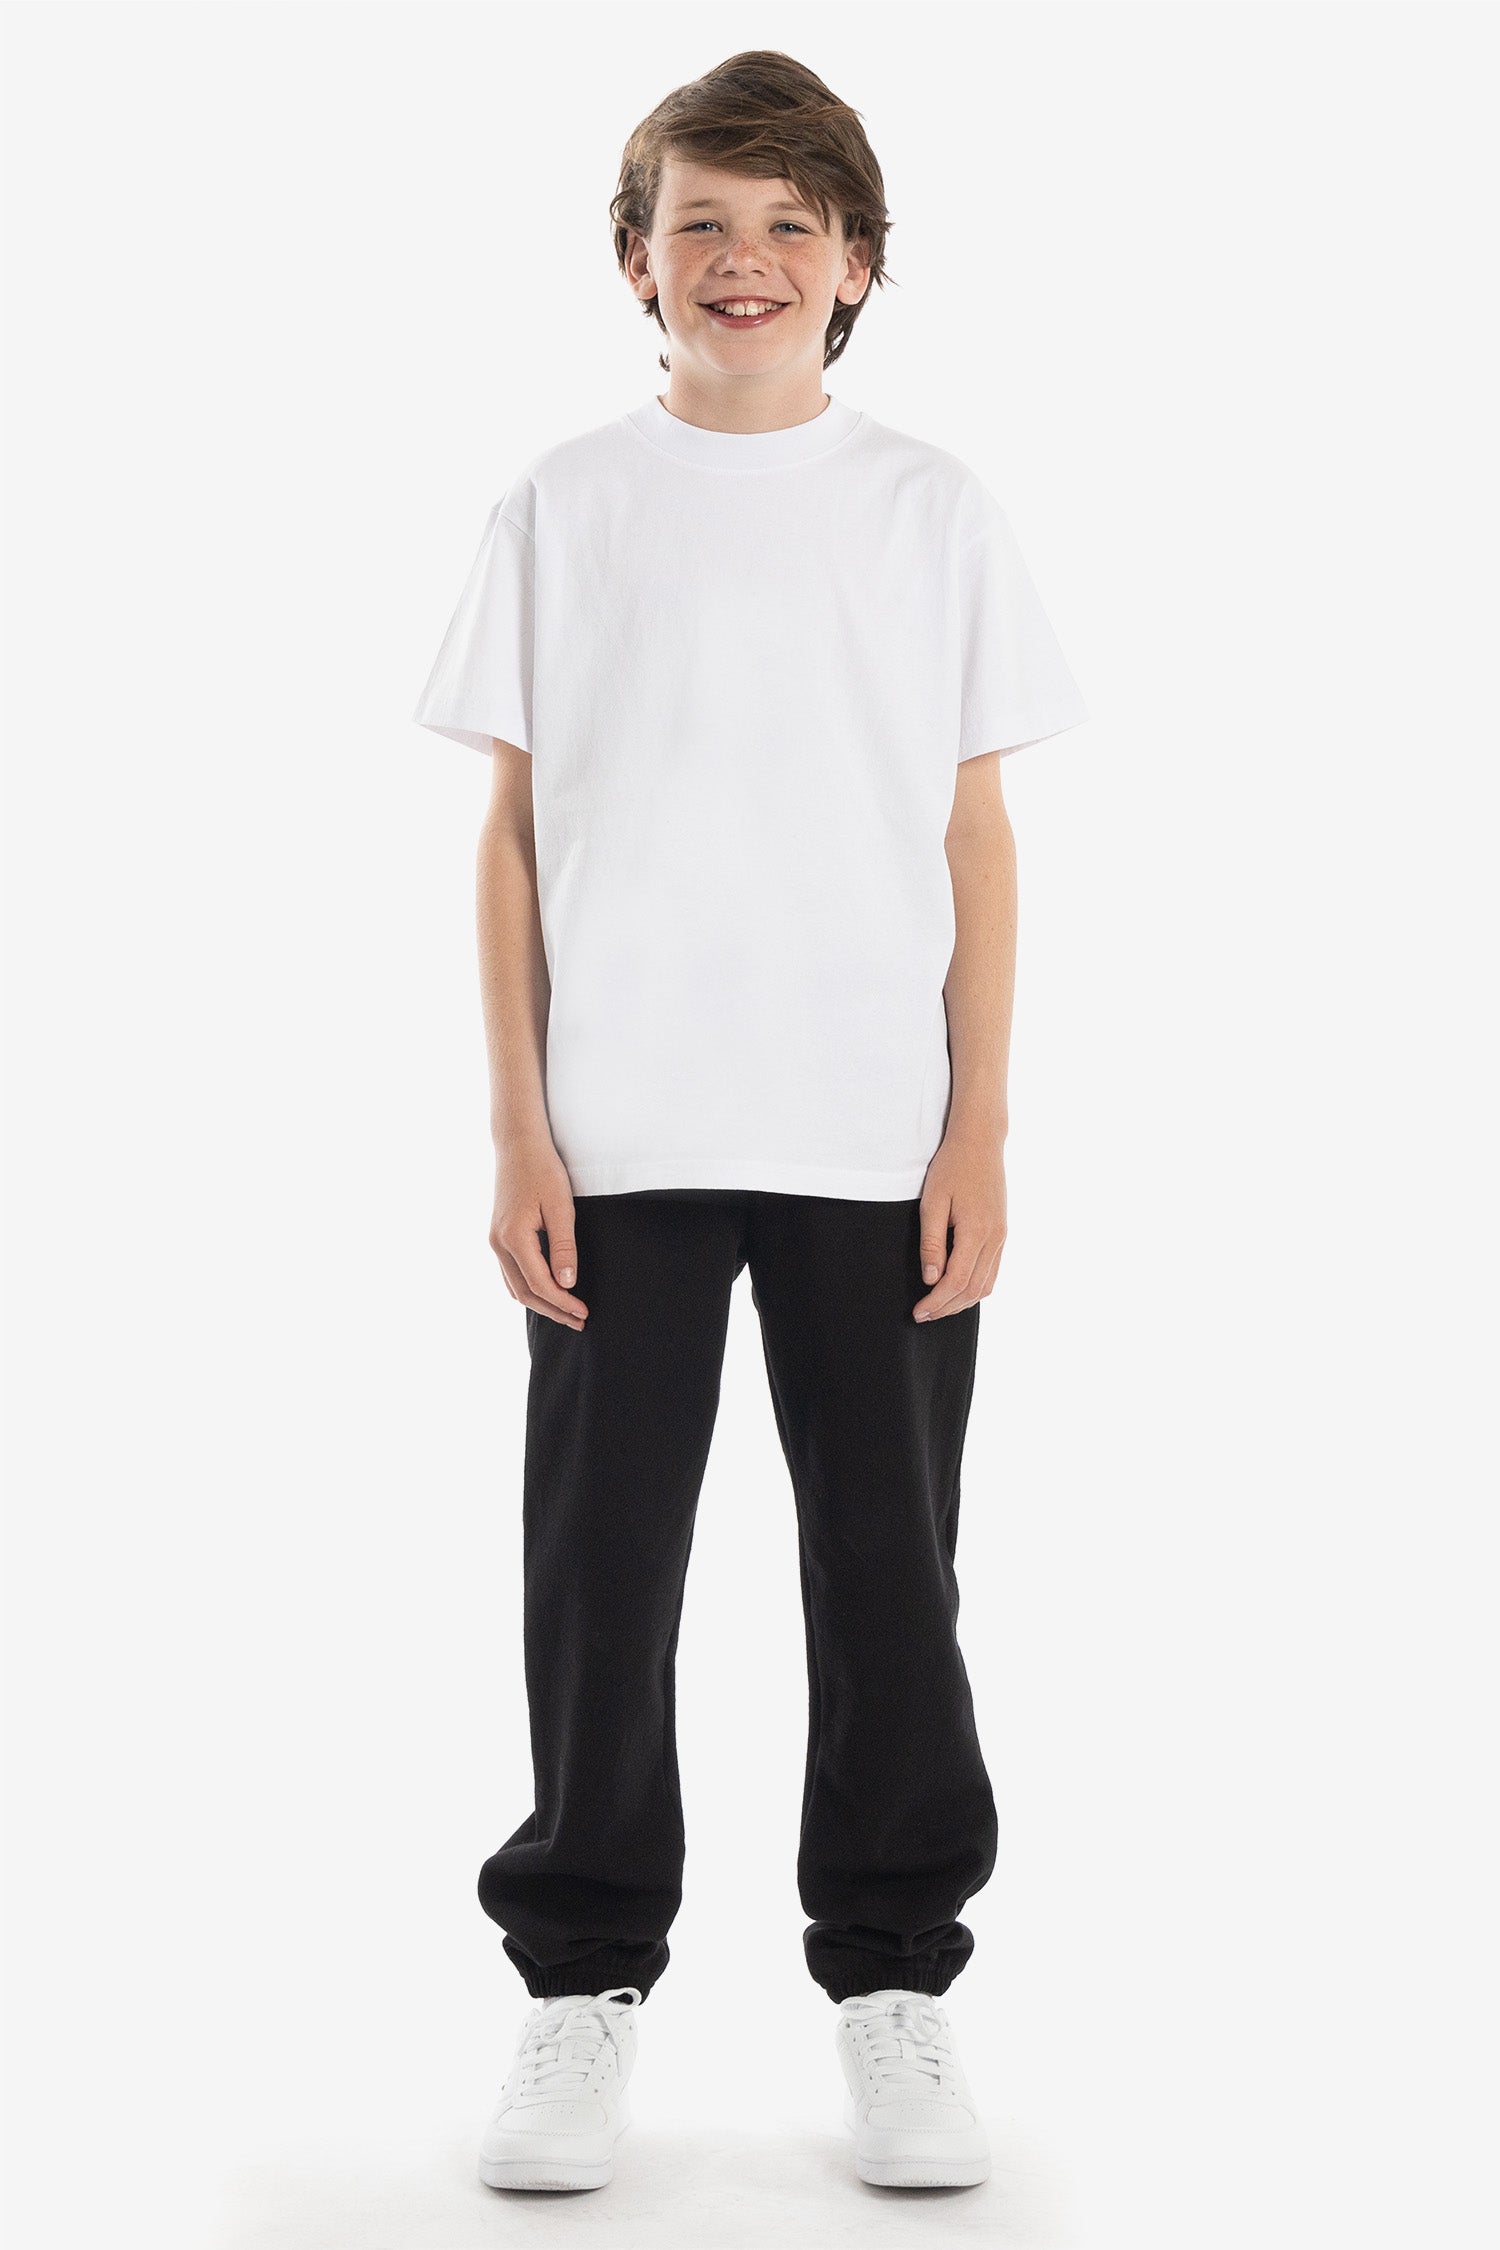 Buy White Color Bottomwear Casual Wear Trousers Clothing for Boy Jollee